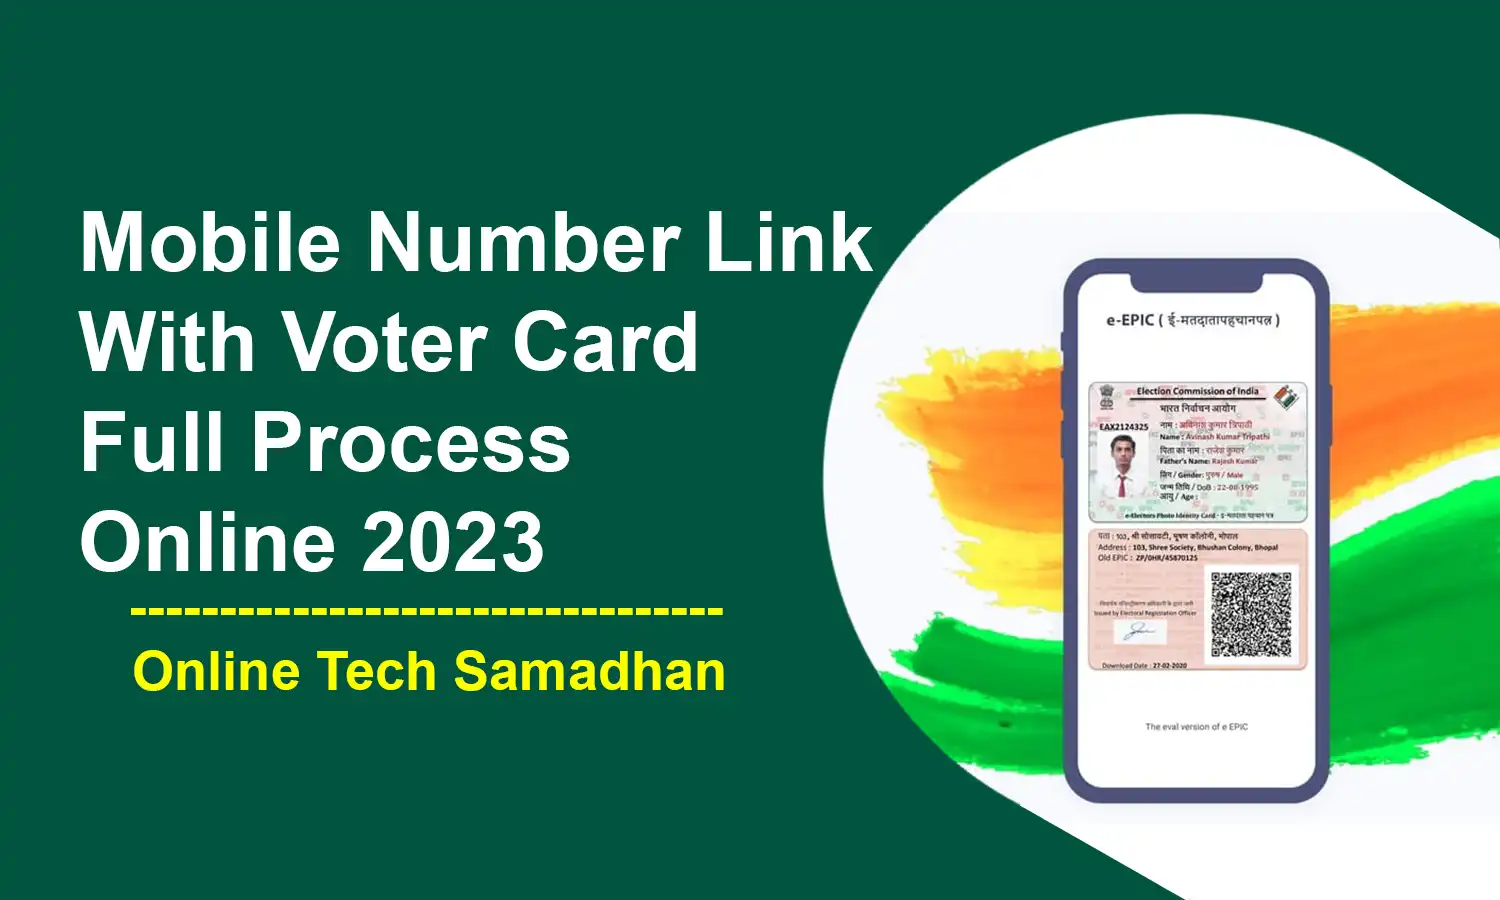 Mobile Number Link With Voter Card